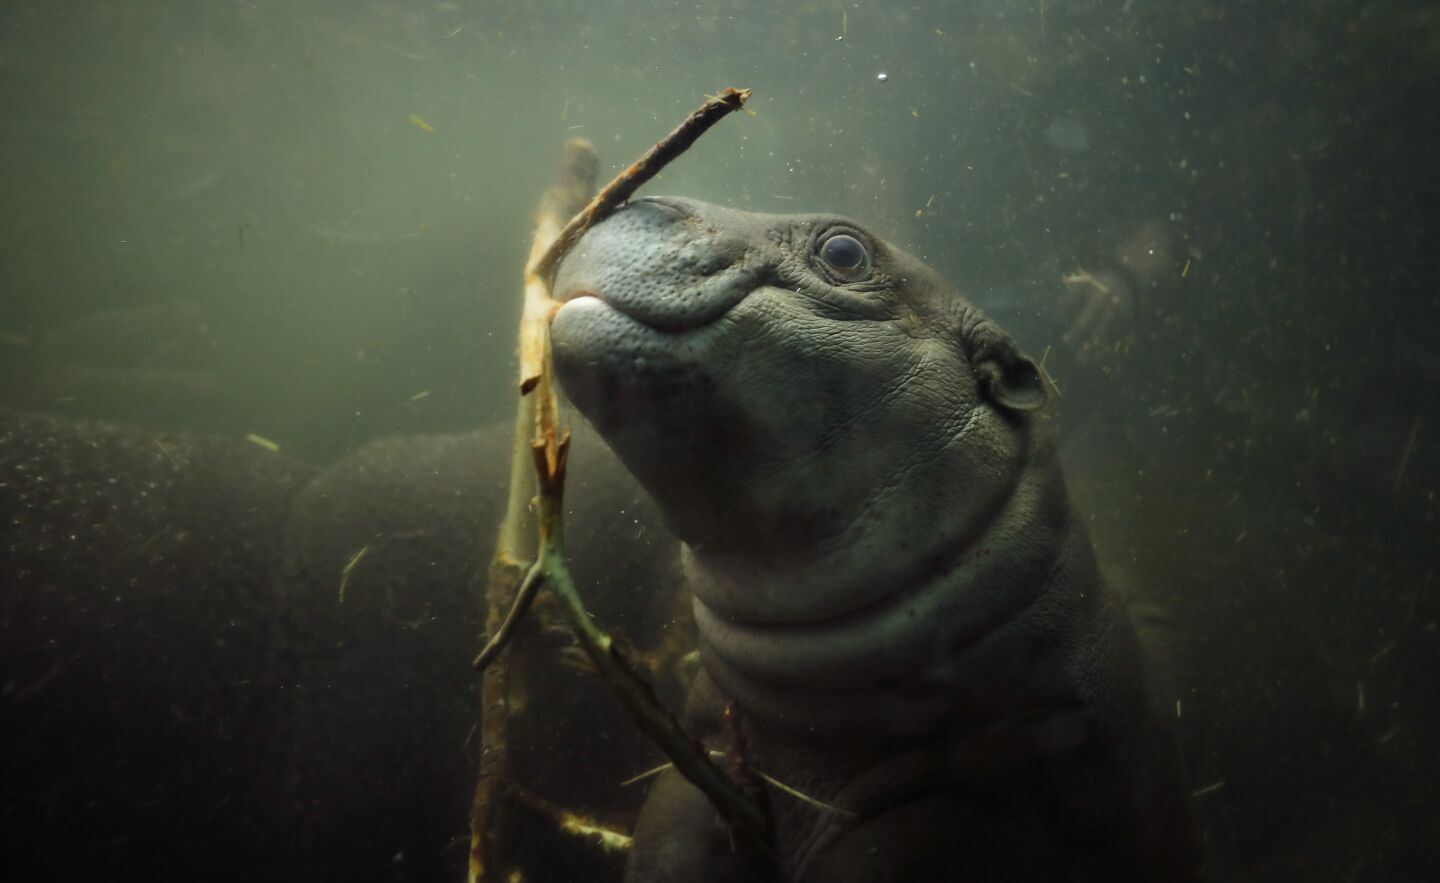 Akobi, a 40-pound, 67- day-old pygmy hippopotamus, swims in the water at the San Diego Zoo on June 15, 2020. Akobi was introduced to the public for the first time as it explored the main exhibit for the first time Monday.